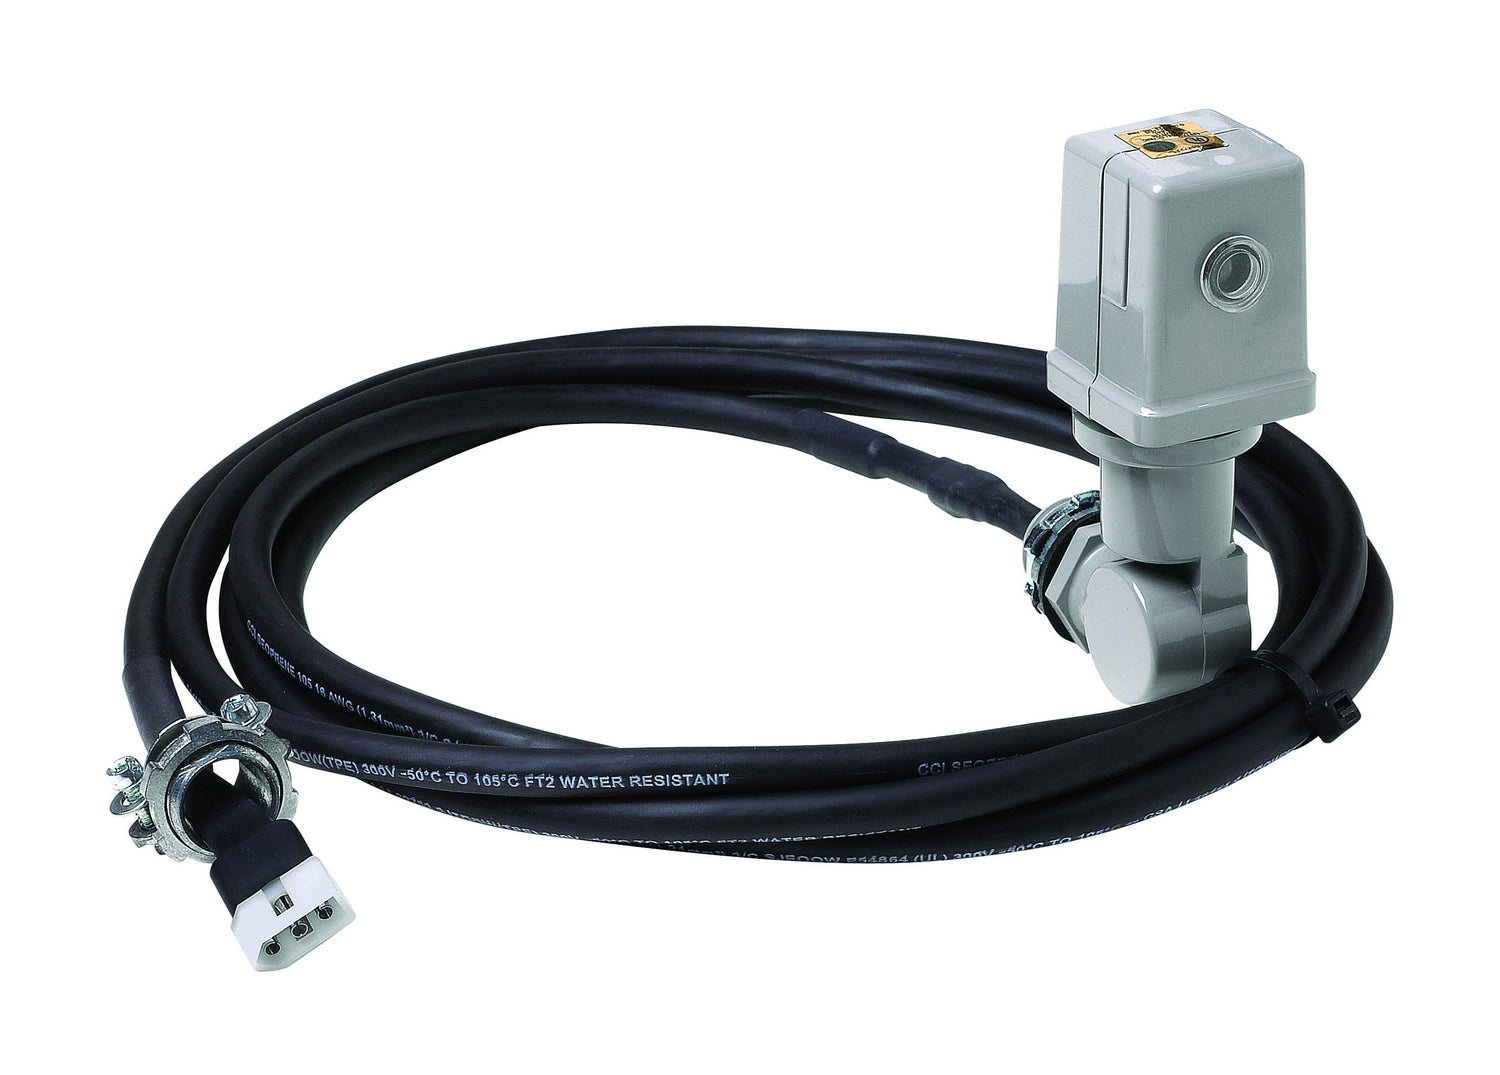 Hinkley - 1510PH - Landscape Photocell - Accessory - Accessories